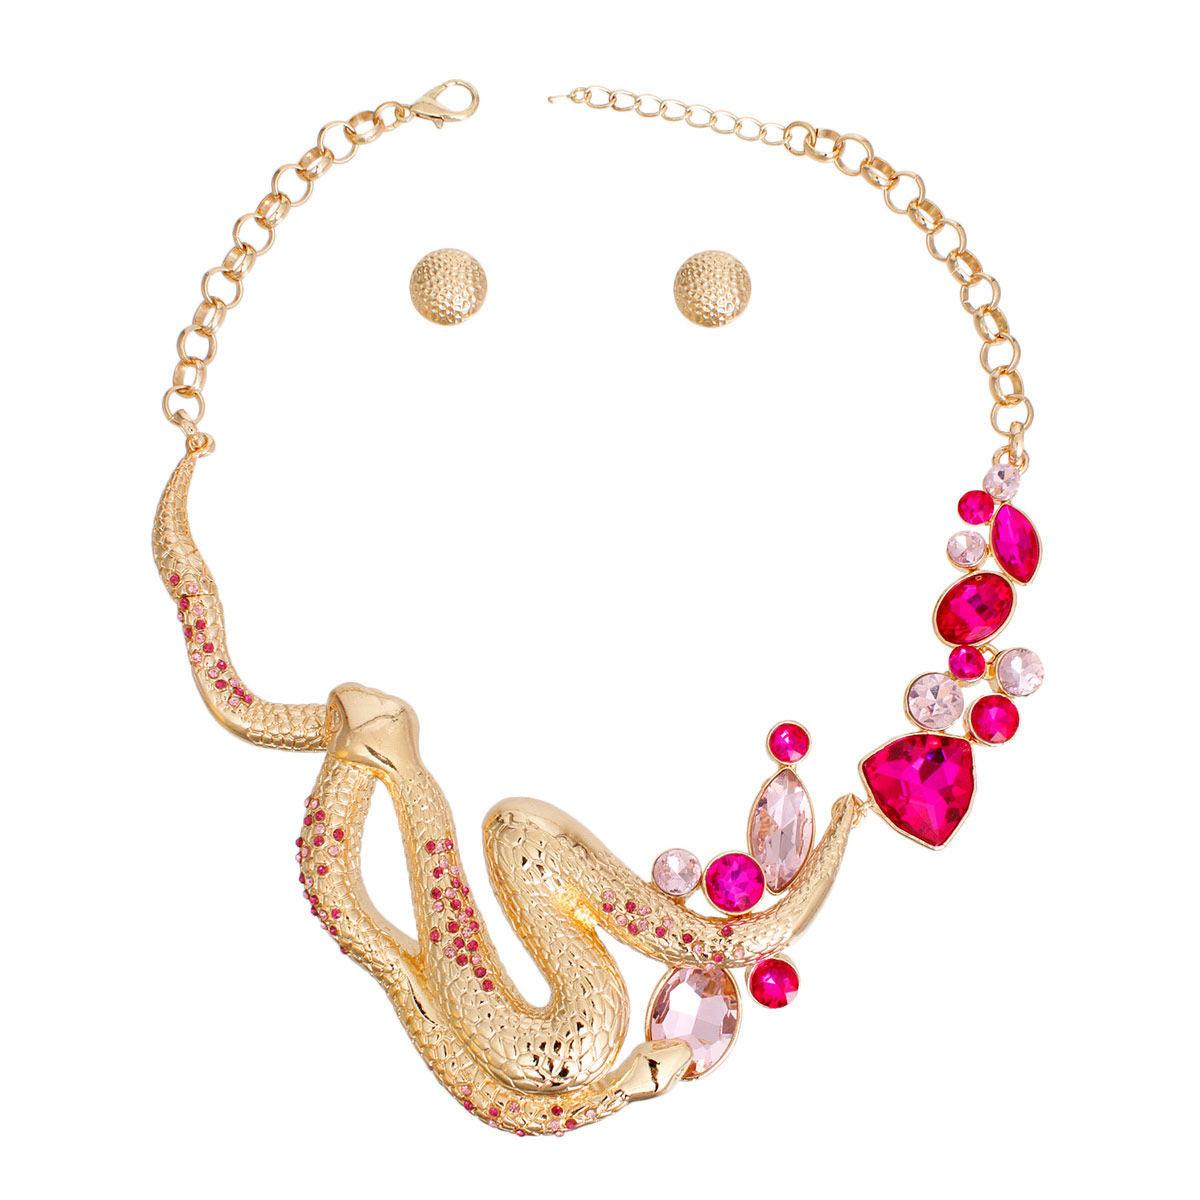 Exclusive Reveal: Gold/Pink Snakes Statement Necklace - Shop Now!